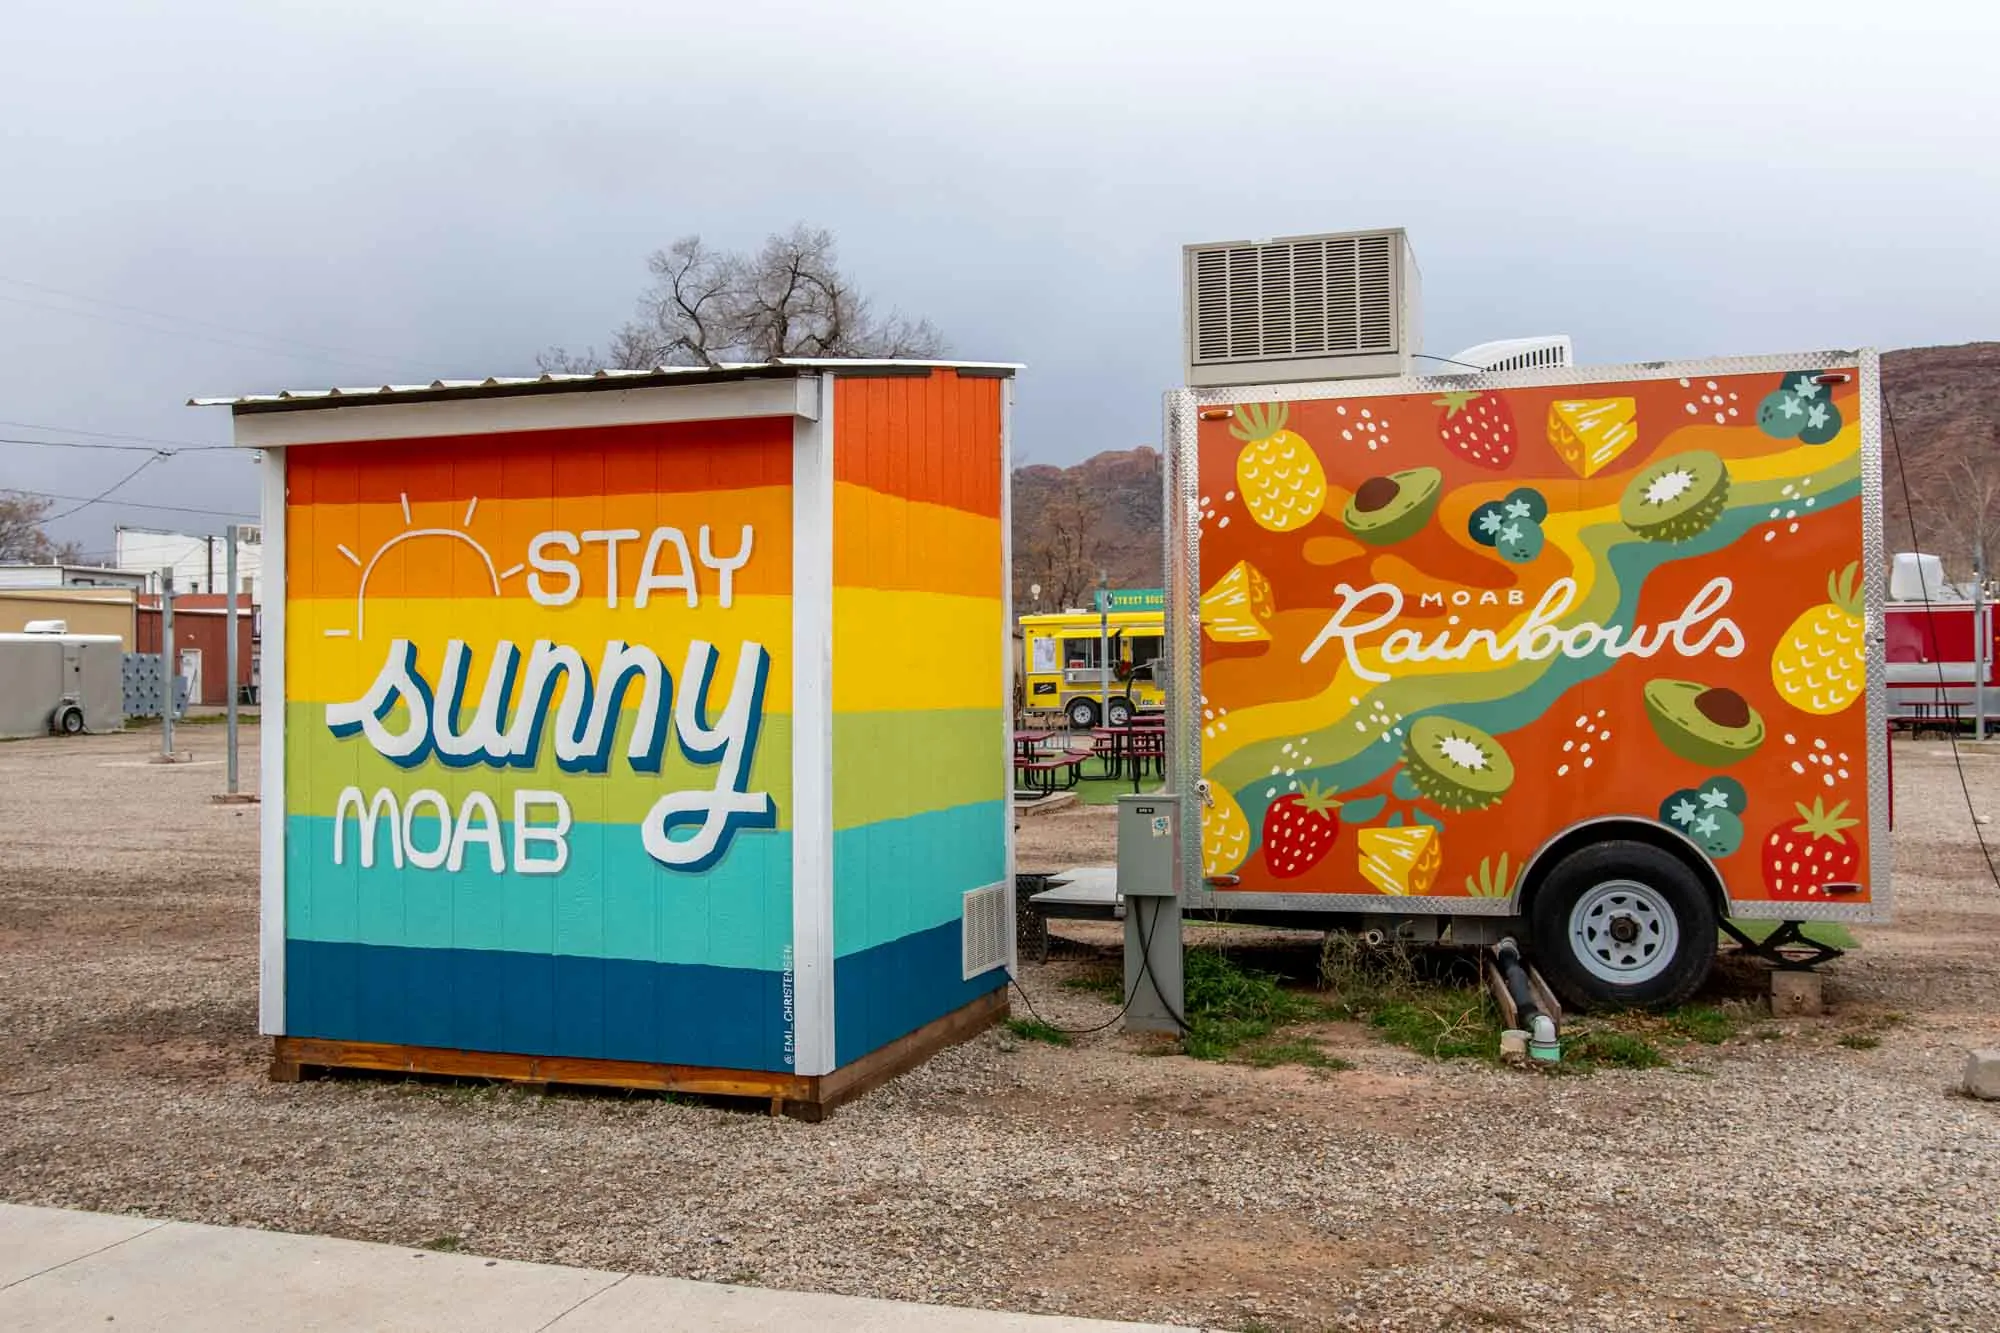 Moab Rainbowls at the food truck park with a painting saying "Stay Sunny Moab"